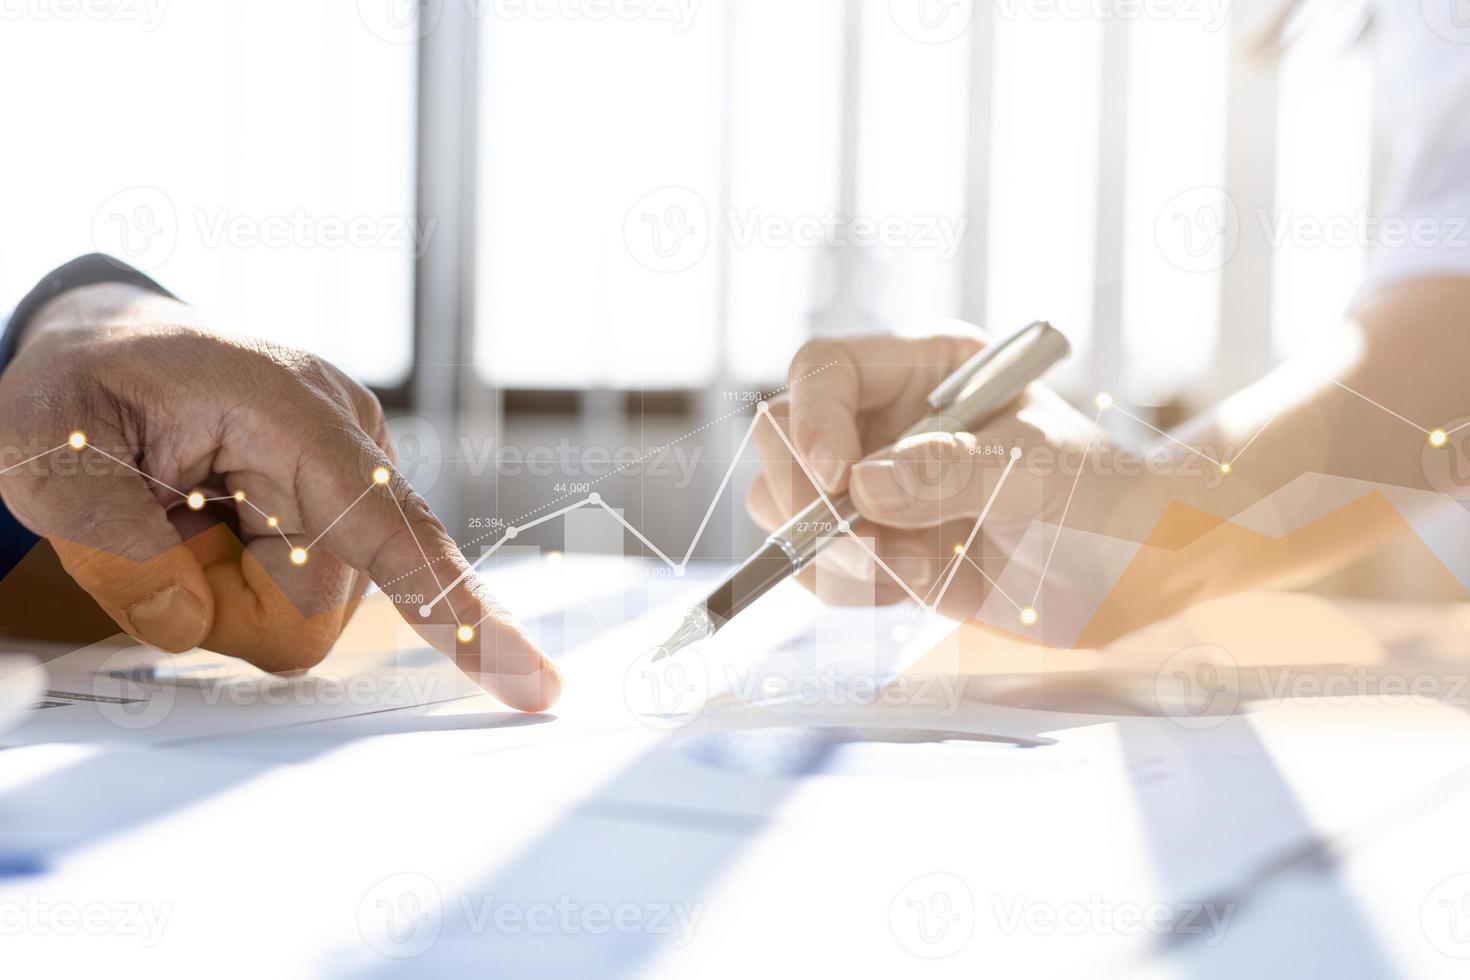 Two businessmen are meeting together, they point to financial documents to discuss plans and solutions, chart graphics showing financial status and performance. Business administration concept. photo